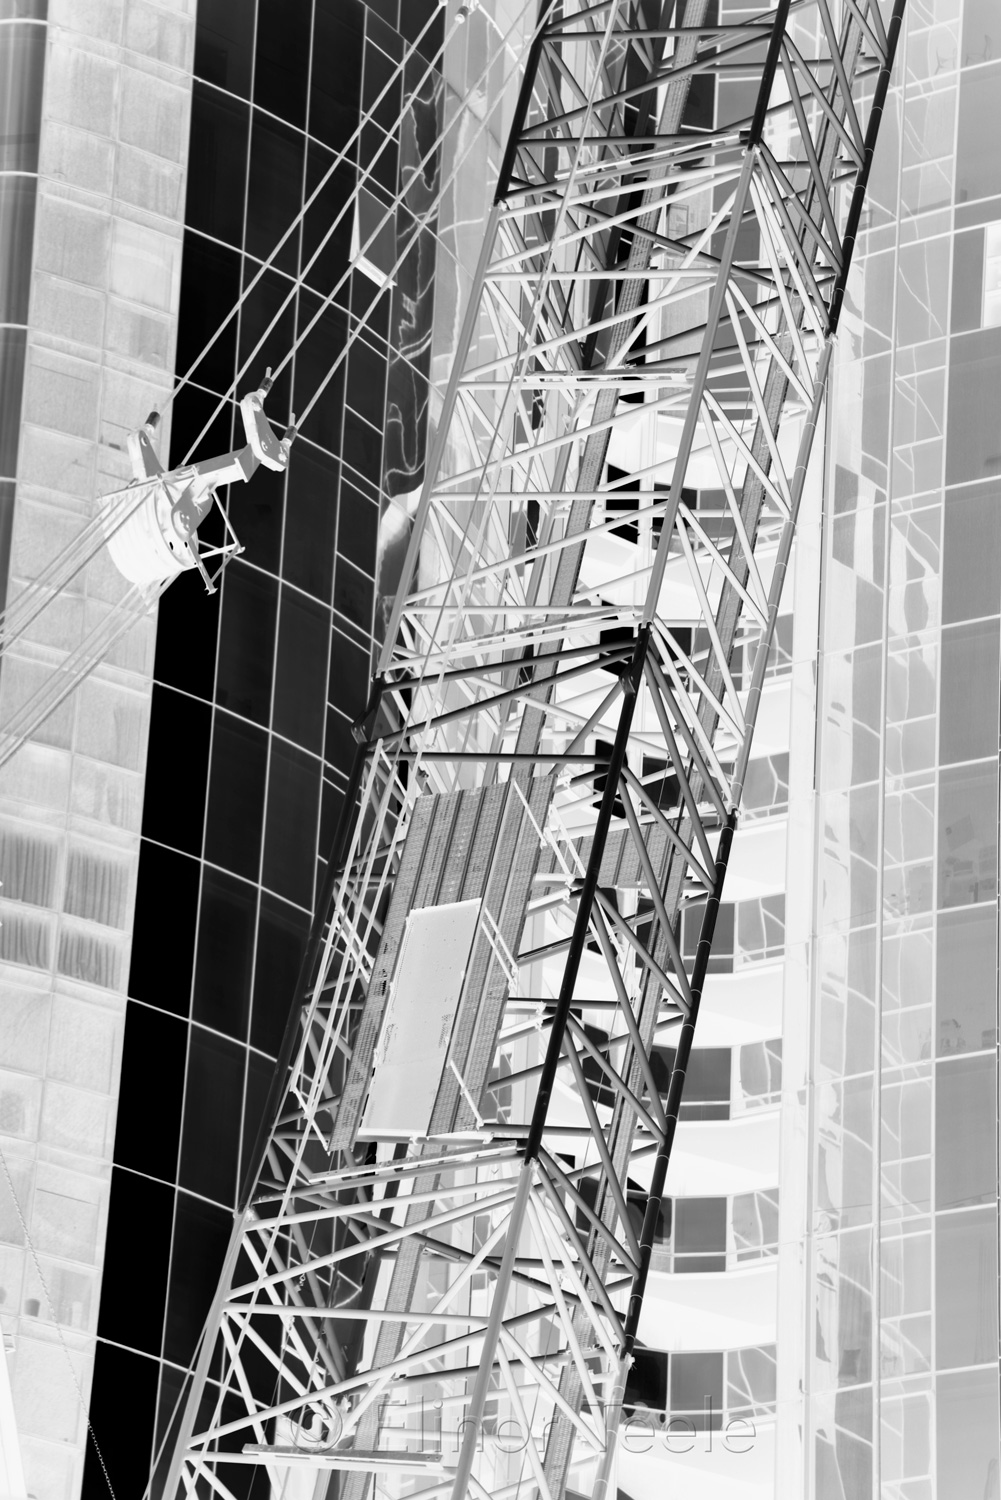 Abstract Melbourne - Crane Close-Up